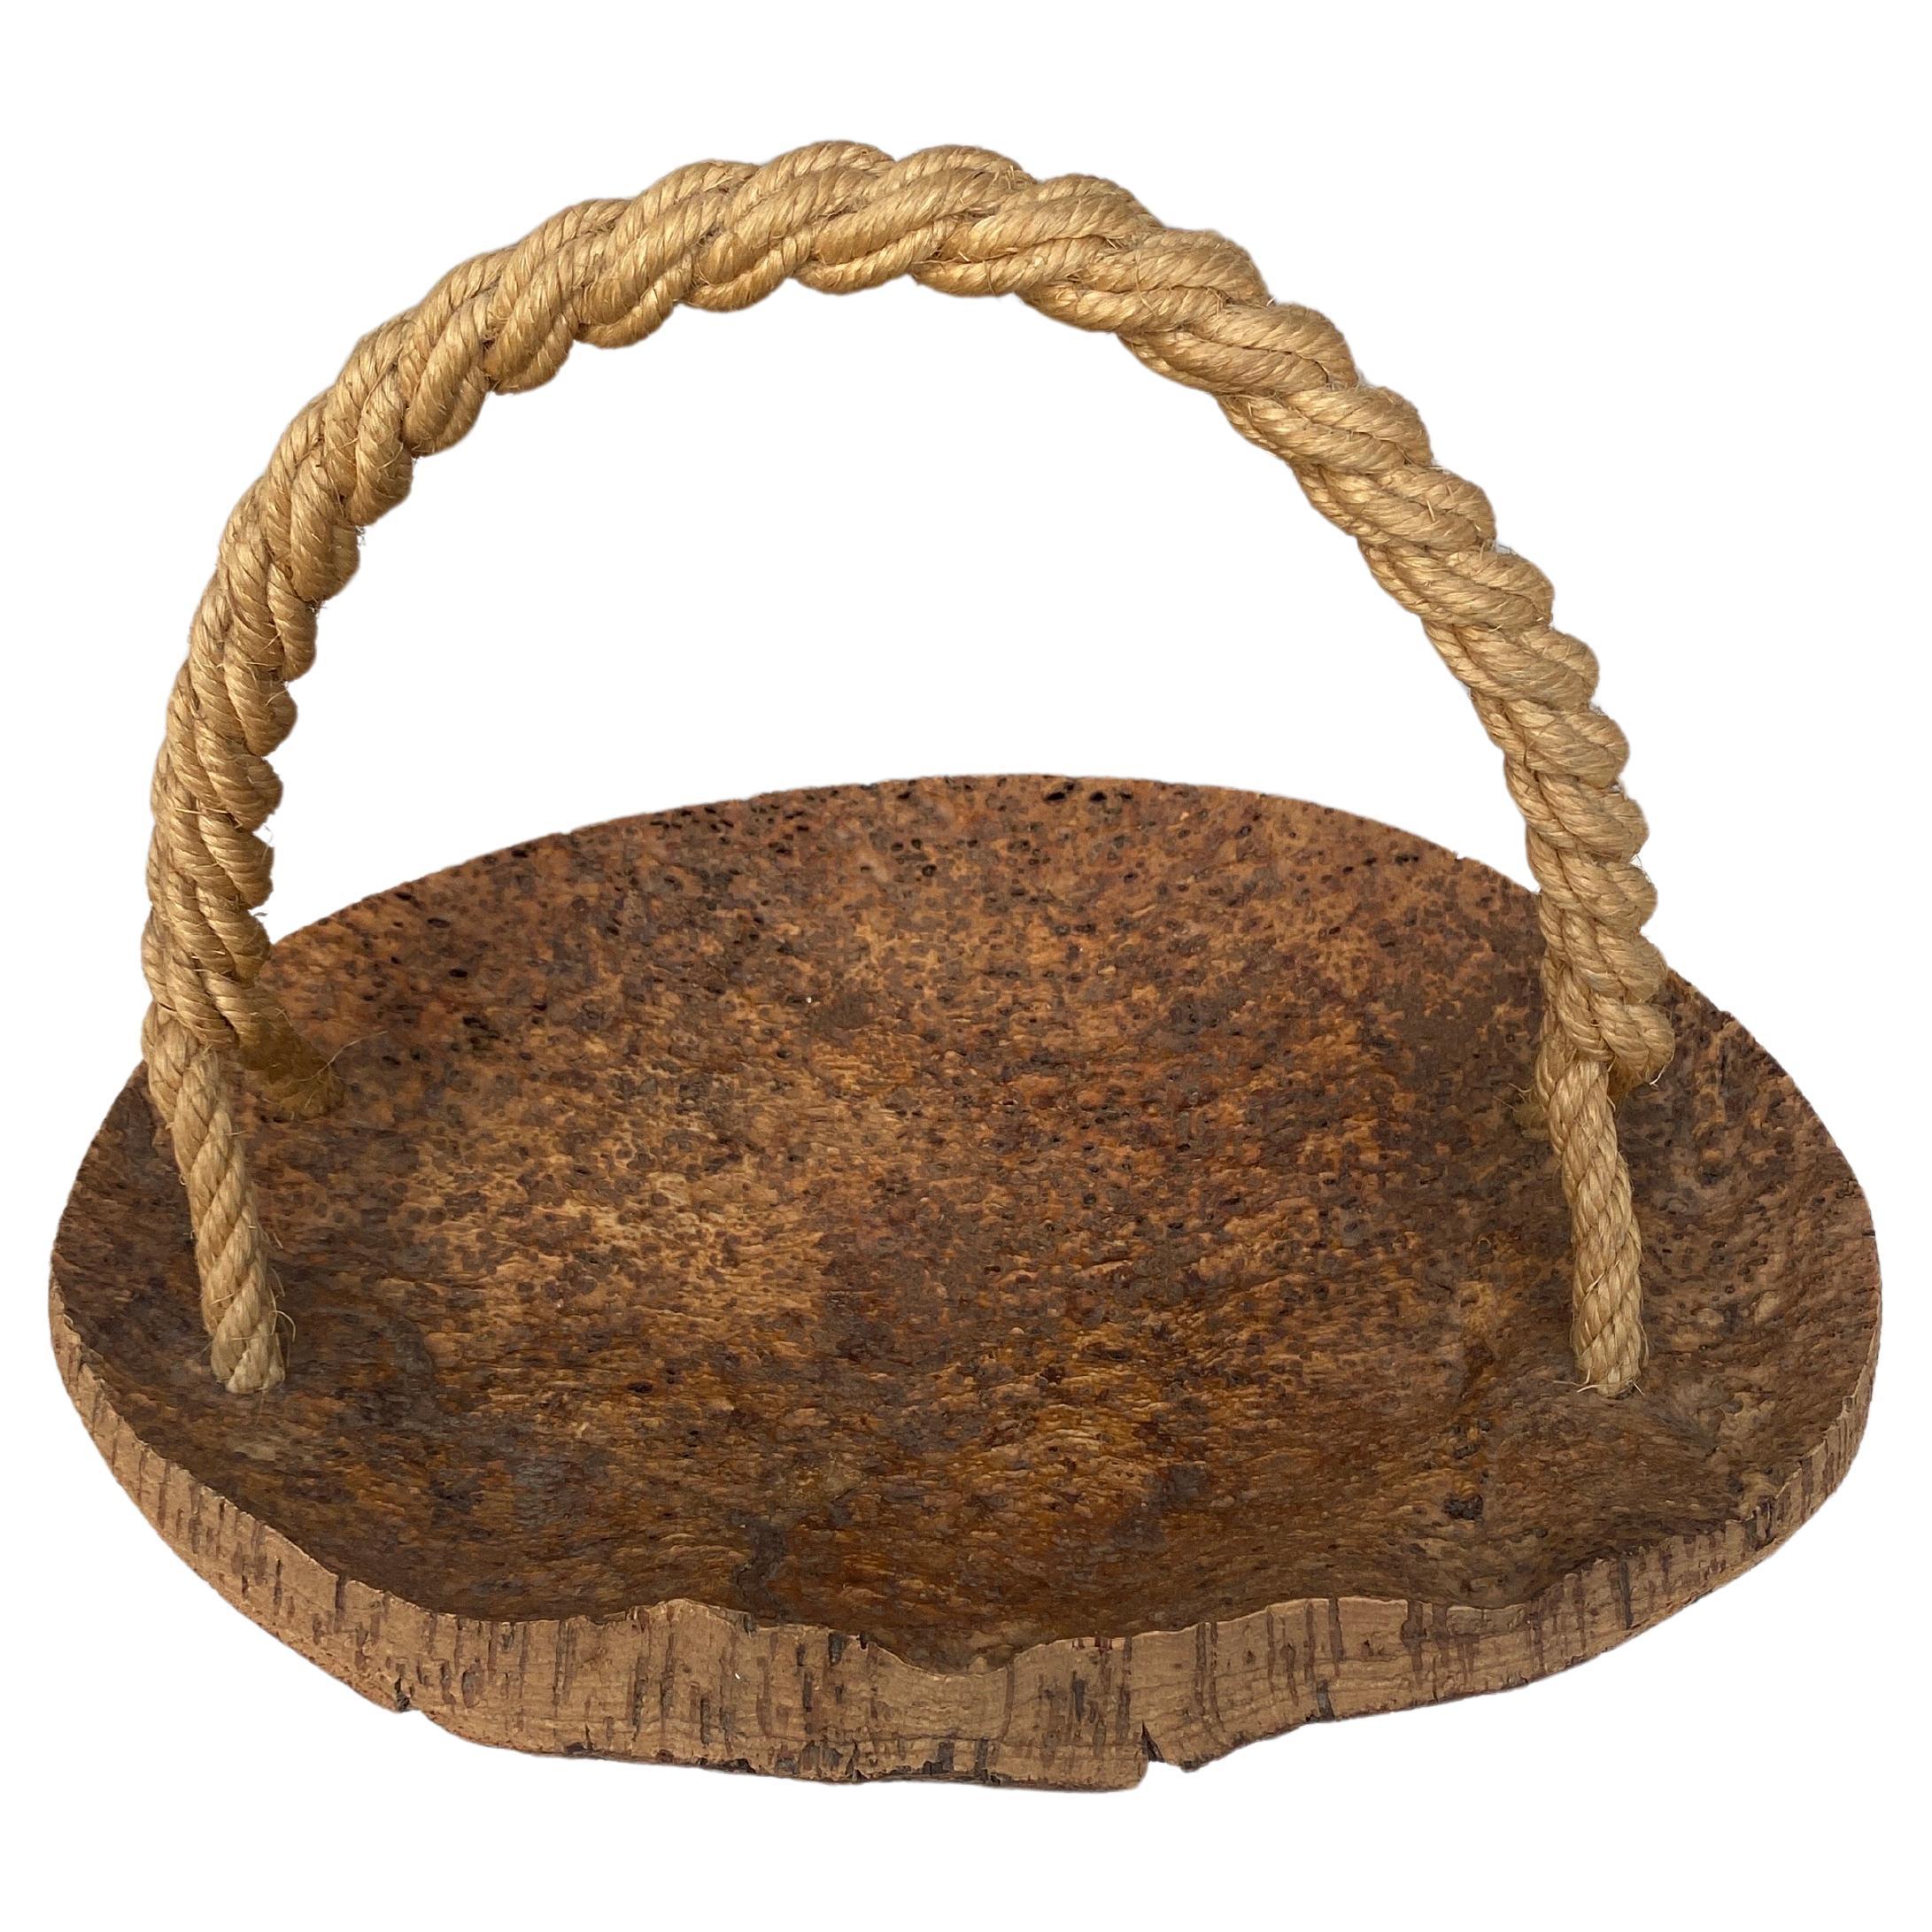 Rope and Cork Fruits Basket Audoux Minet.
15.3 inches.